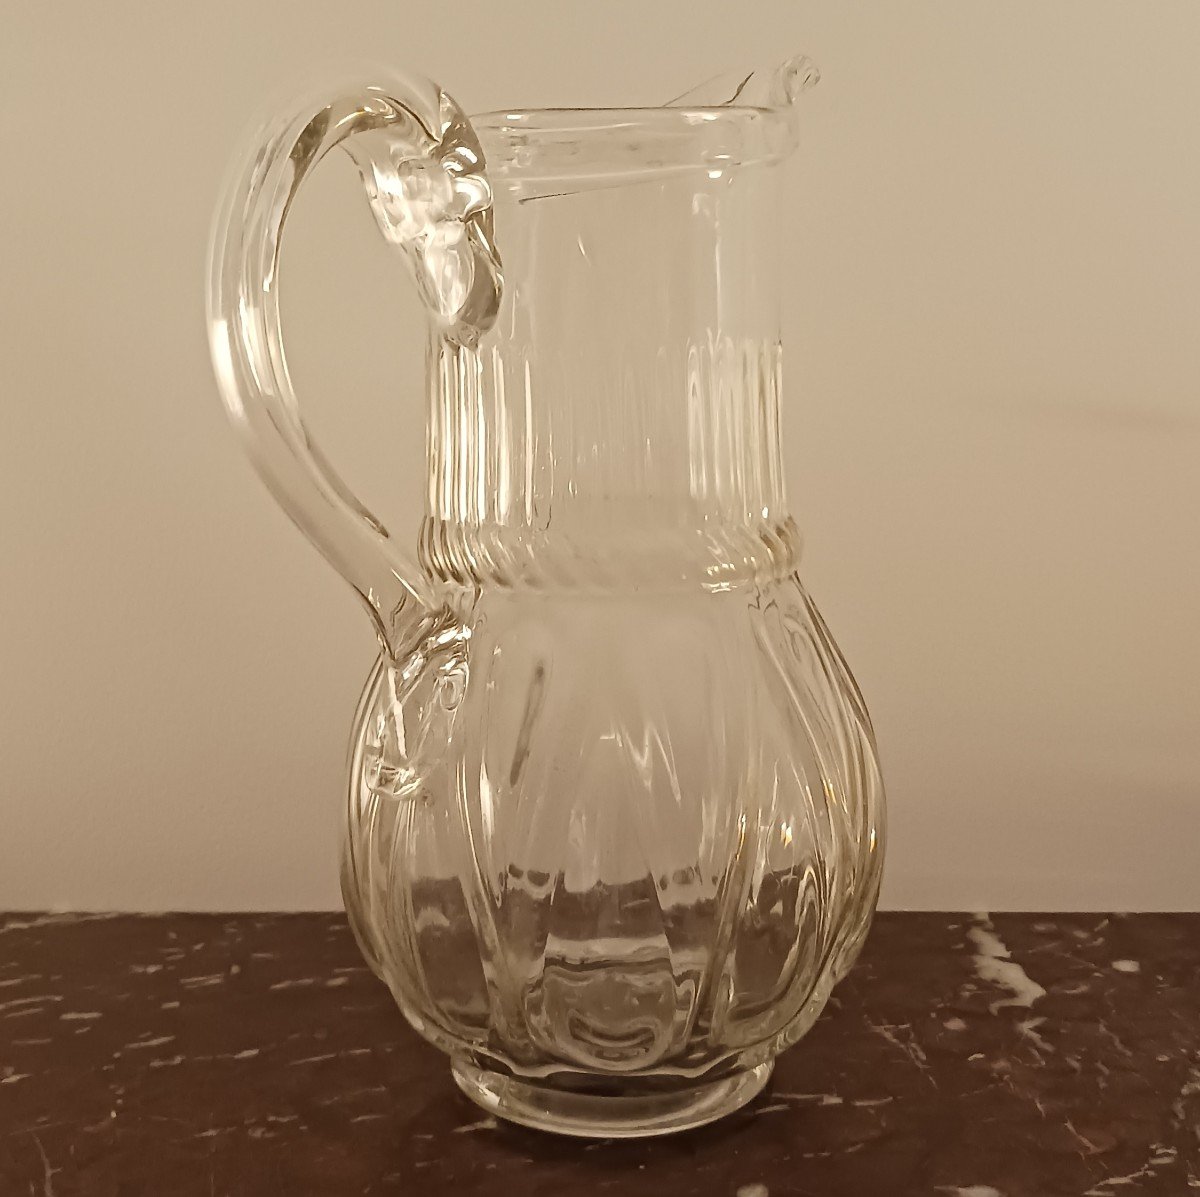 Normandy, Late 18th Century - Jug Or Cider Pitcher - Colourless Blown Glass  -photo-4